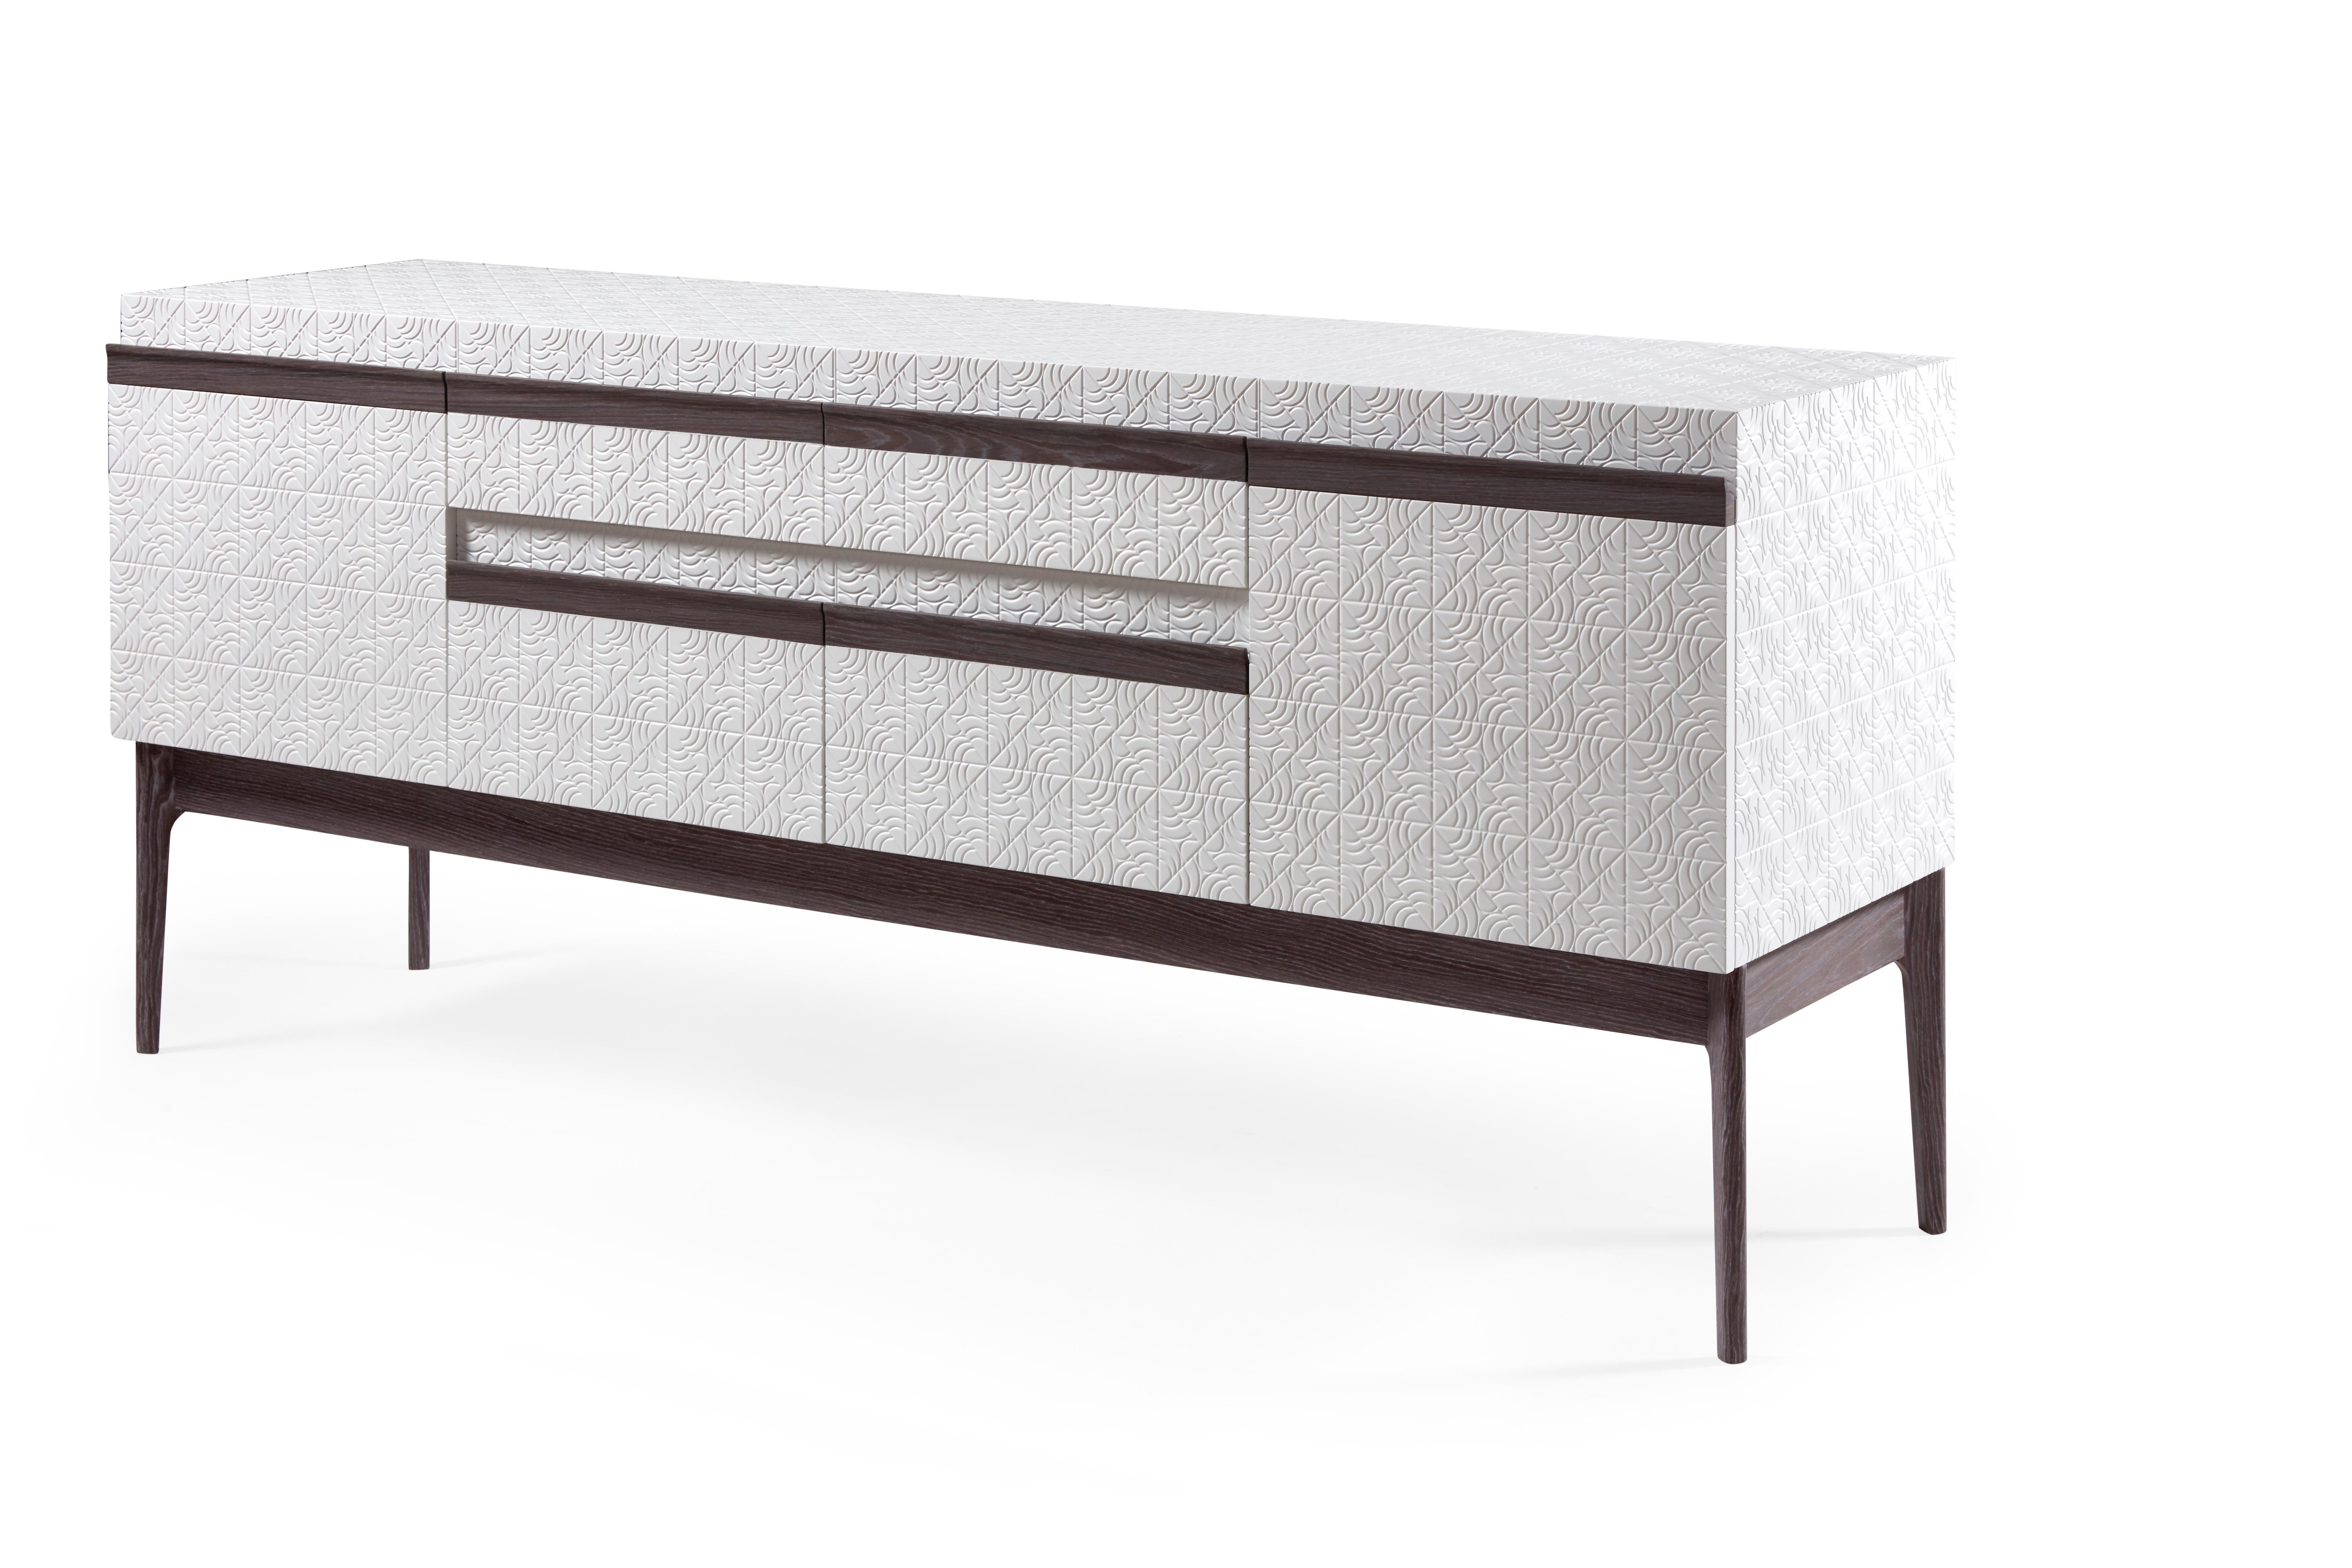 Intricacy and mixed materials collide with the Rosa sideboard. The rose motif, fused with geometric pattern work, is hand carved and lacquered. A contrasting wood detail serves as the cabinet handle for doors and drawers that provide ample dining